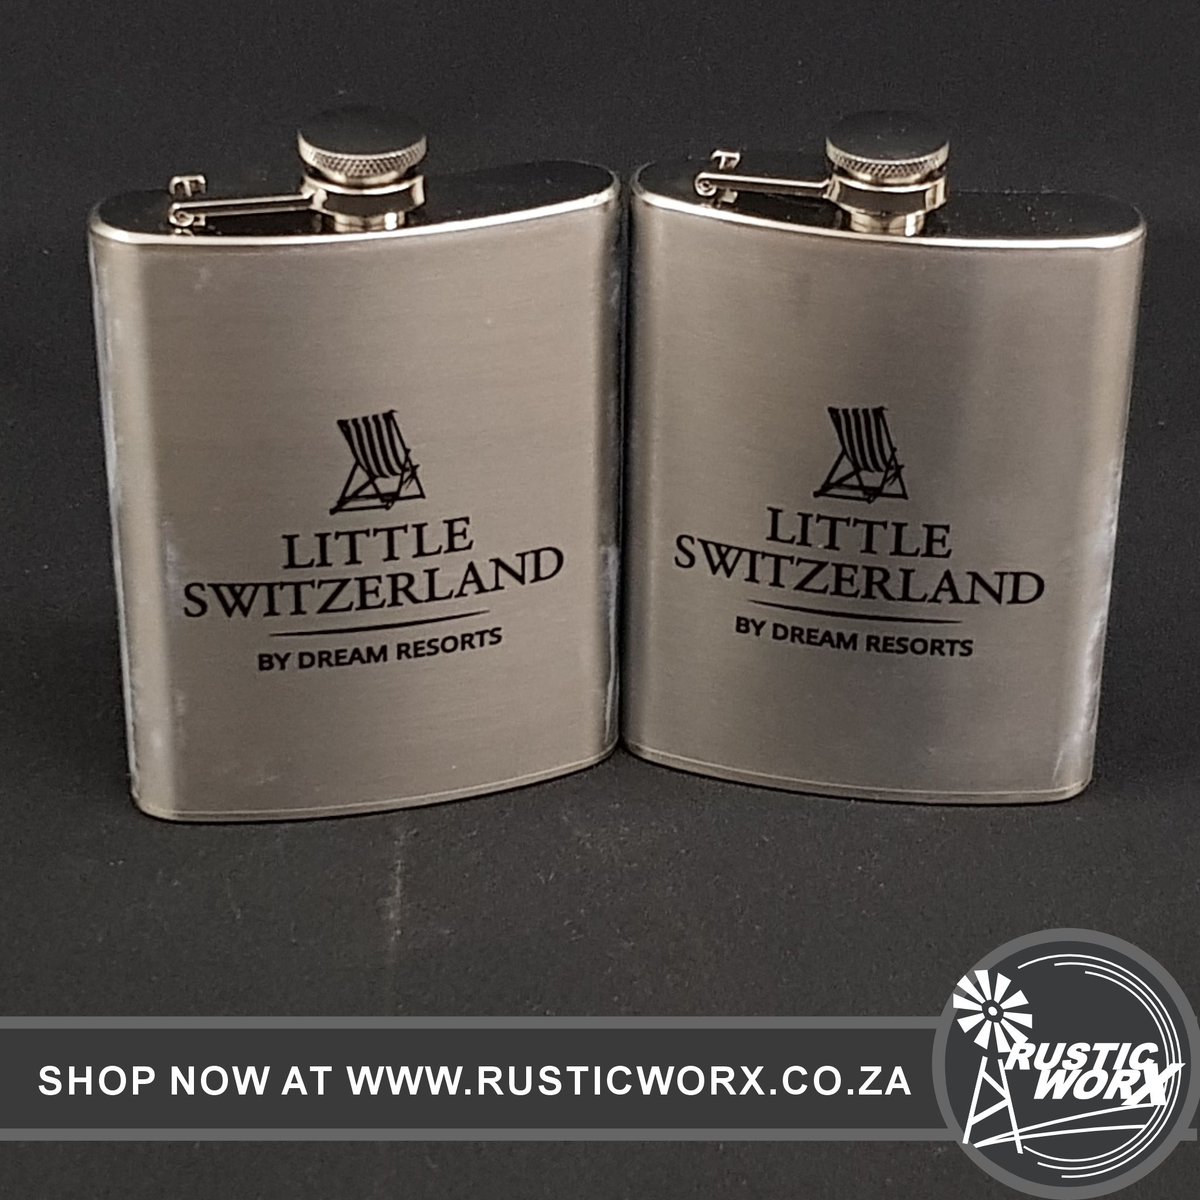 Every sip tells a story. Our personalized hip flask adds a touch of sophistication to your sips and a personal touch to your moments. 🥃

 Visit our website rusticworx.co.za or Contact us on sales@rusticworx.co.za 

#brandedgifts #uniquegifts #hipflask  #rusticworx